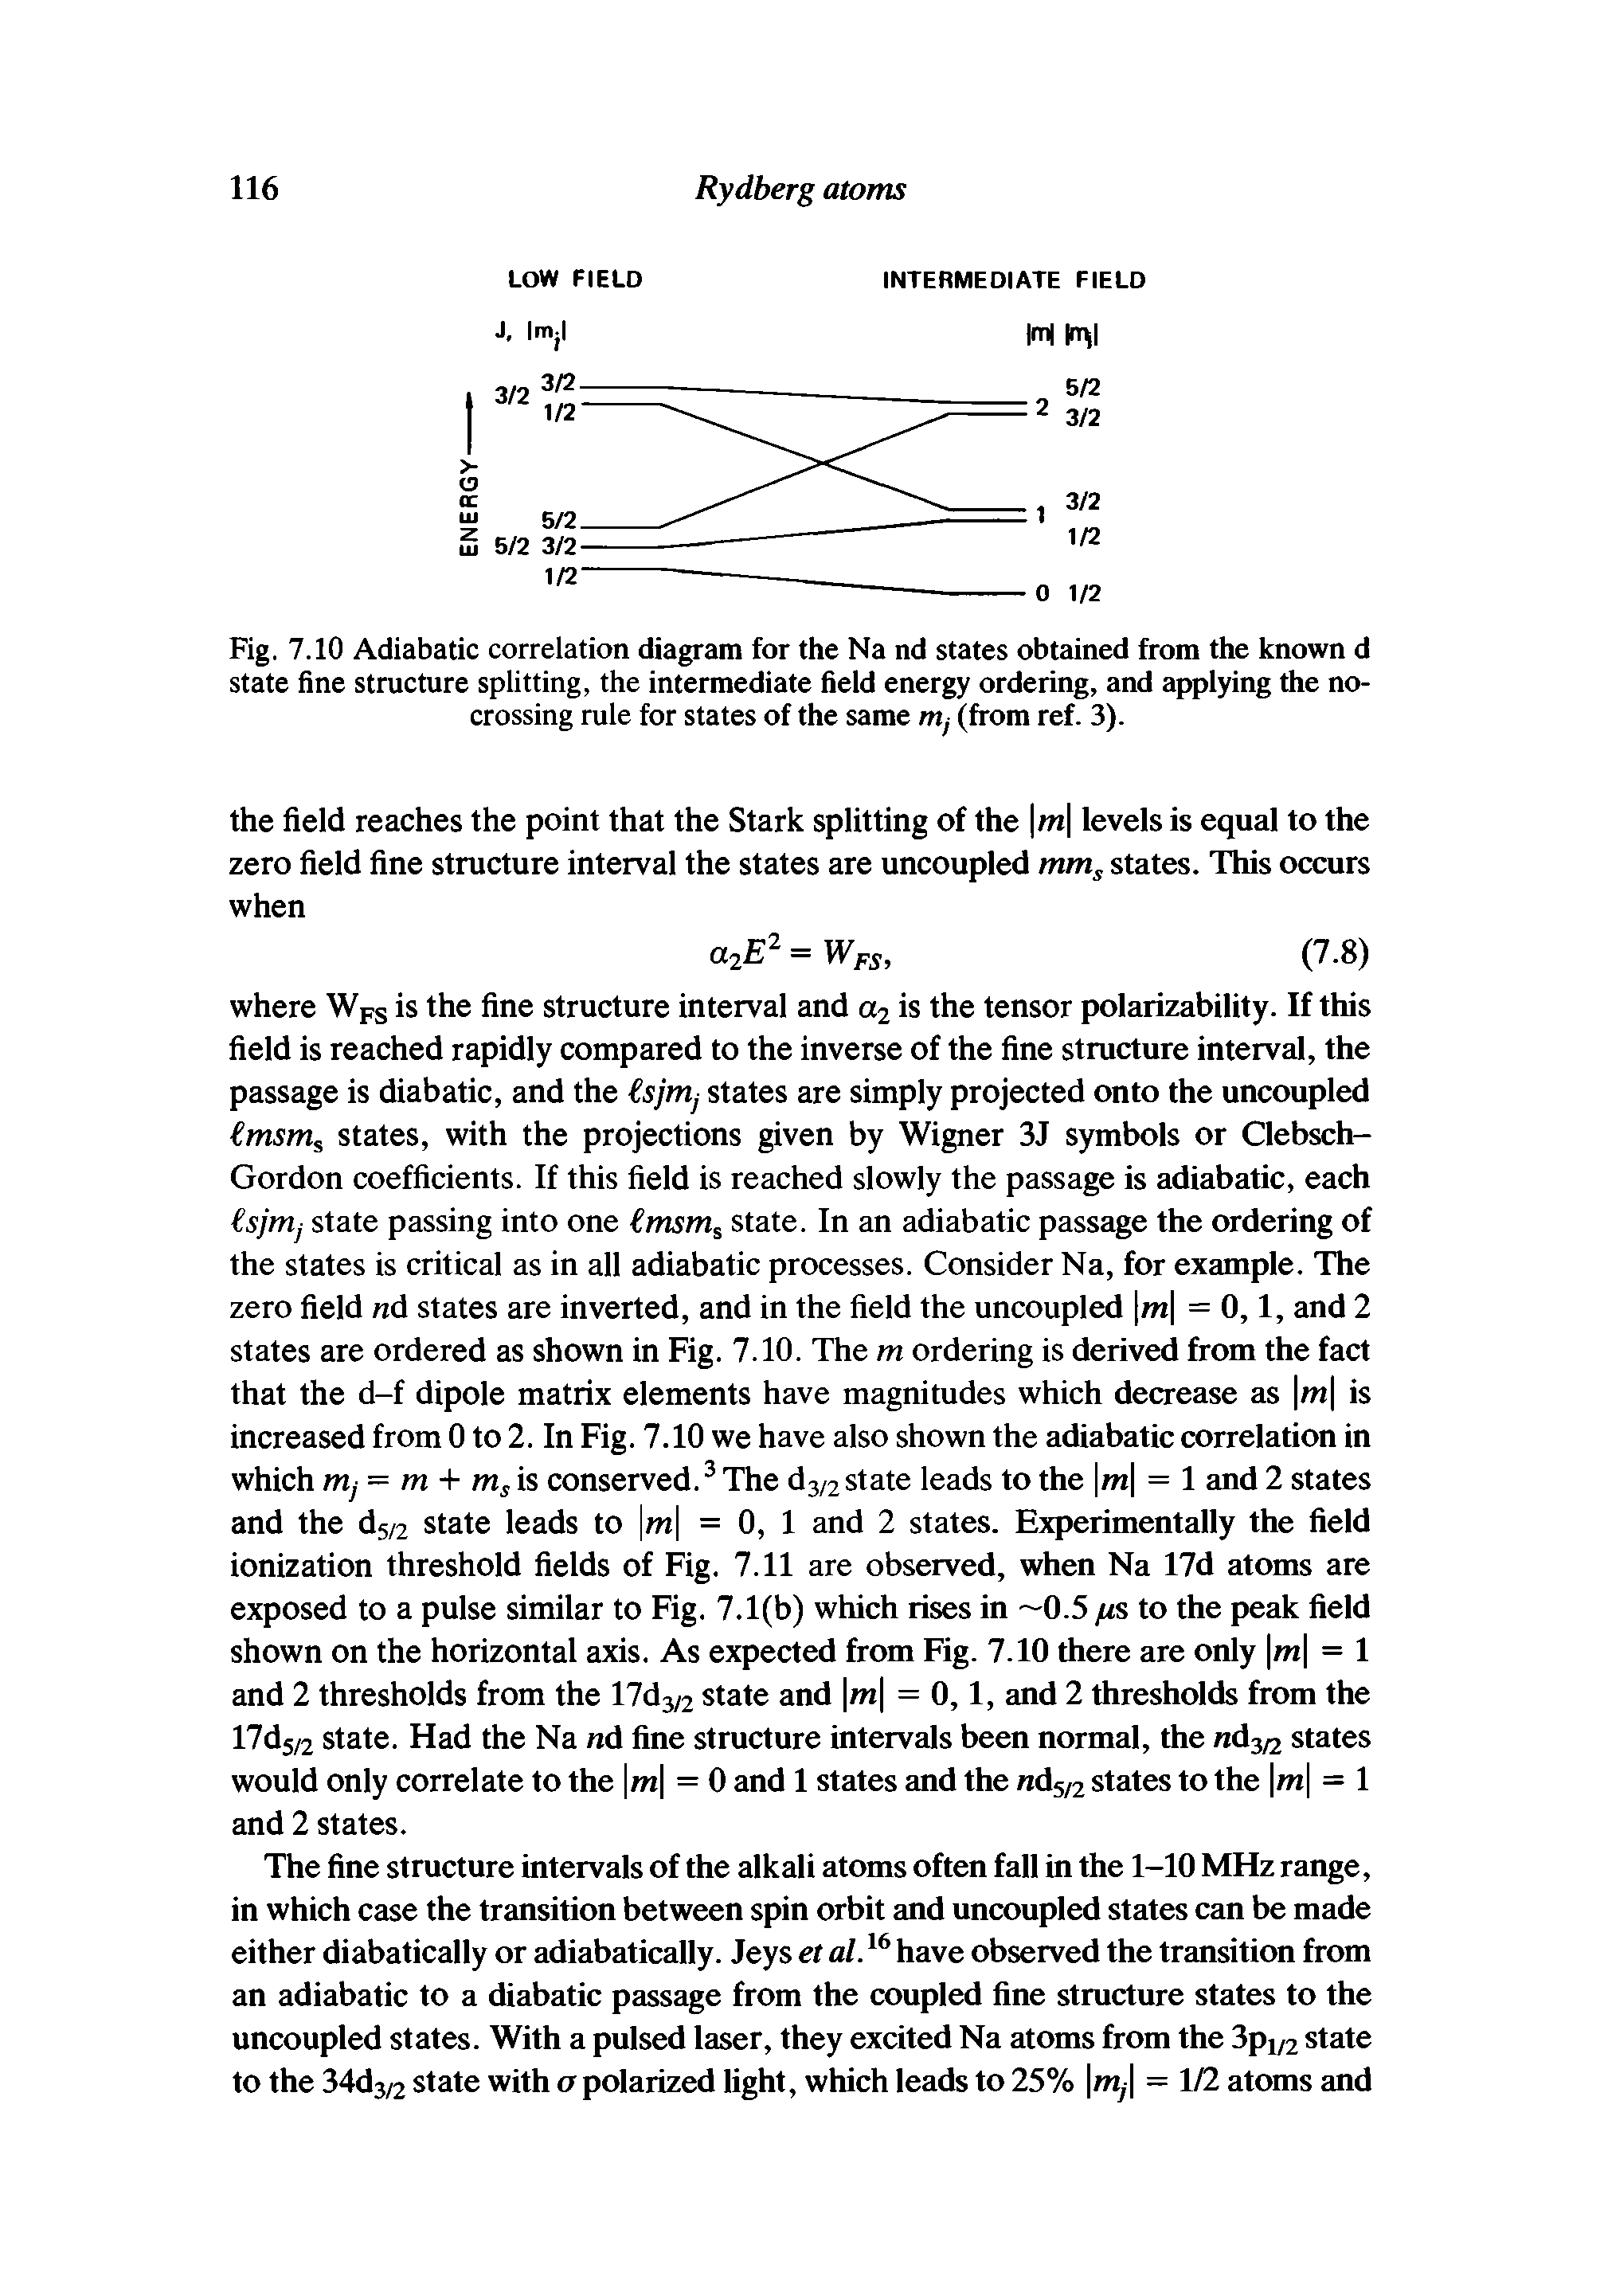 Fig. 7.10 Adiabatic correlation diagram for the Na nd states obtained from the known d state fine structure splitting, the intermediate field energy ordering, and applying the nocrossing rule for states of the same m (from ref. 3).